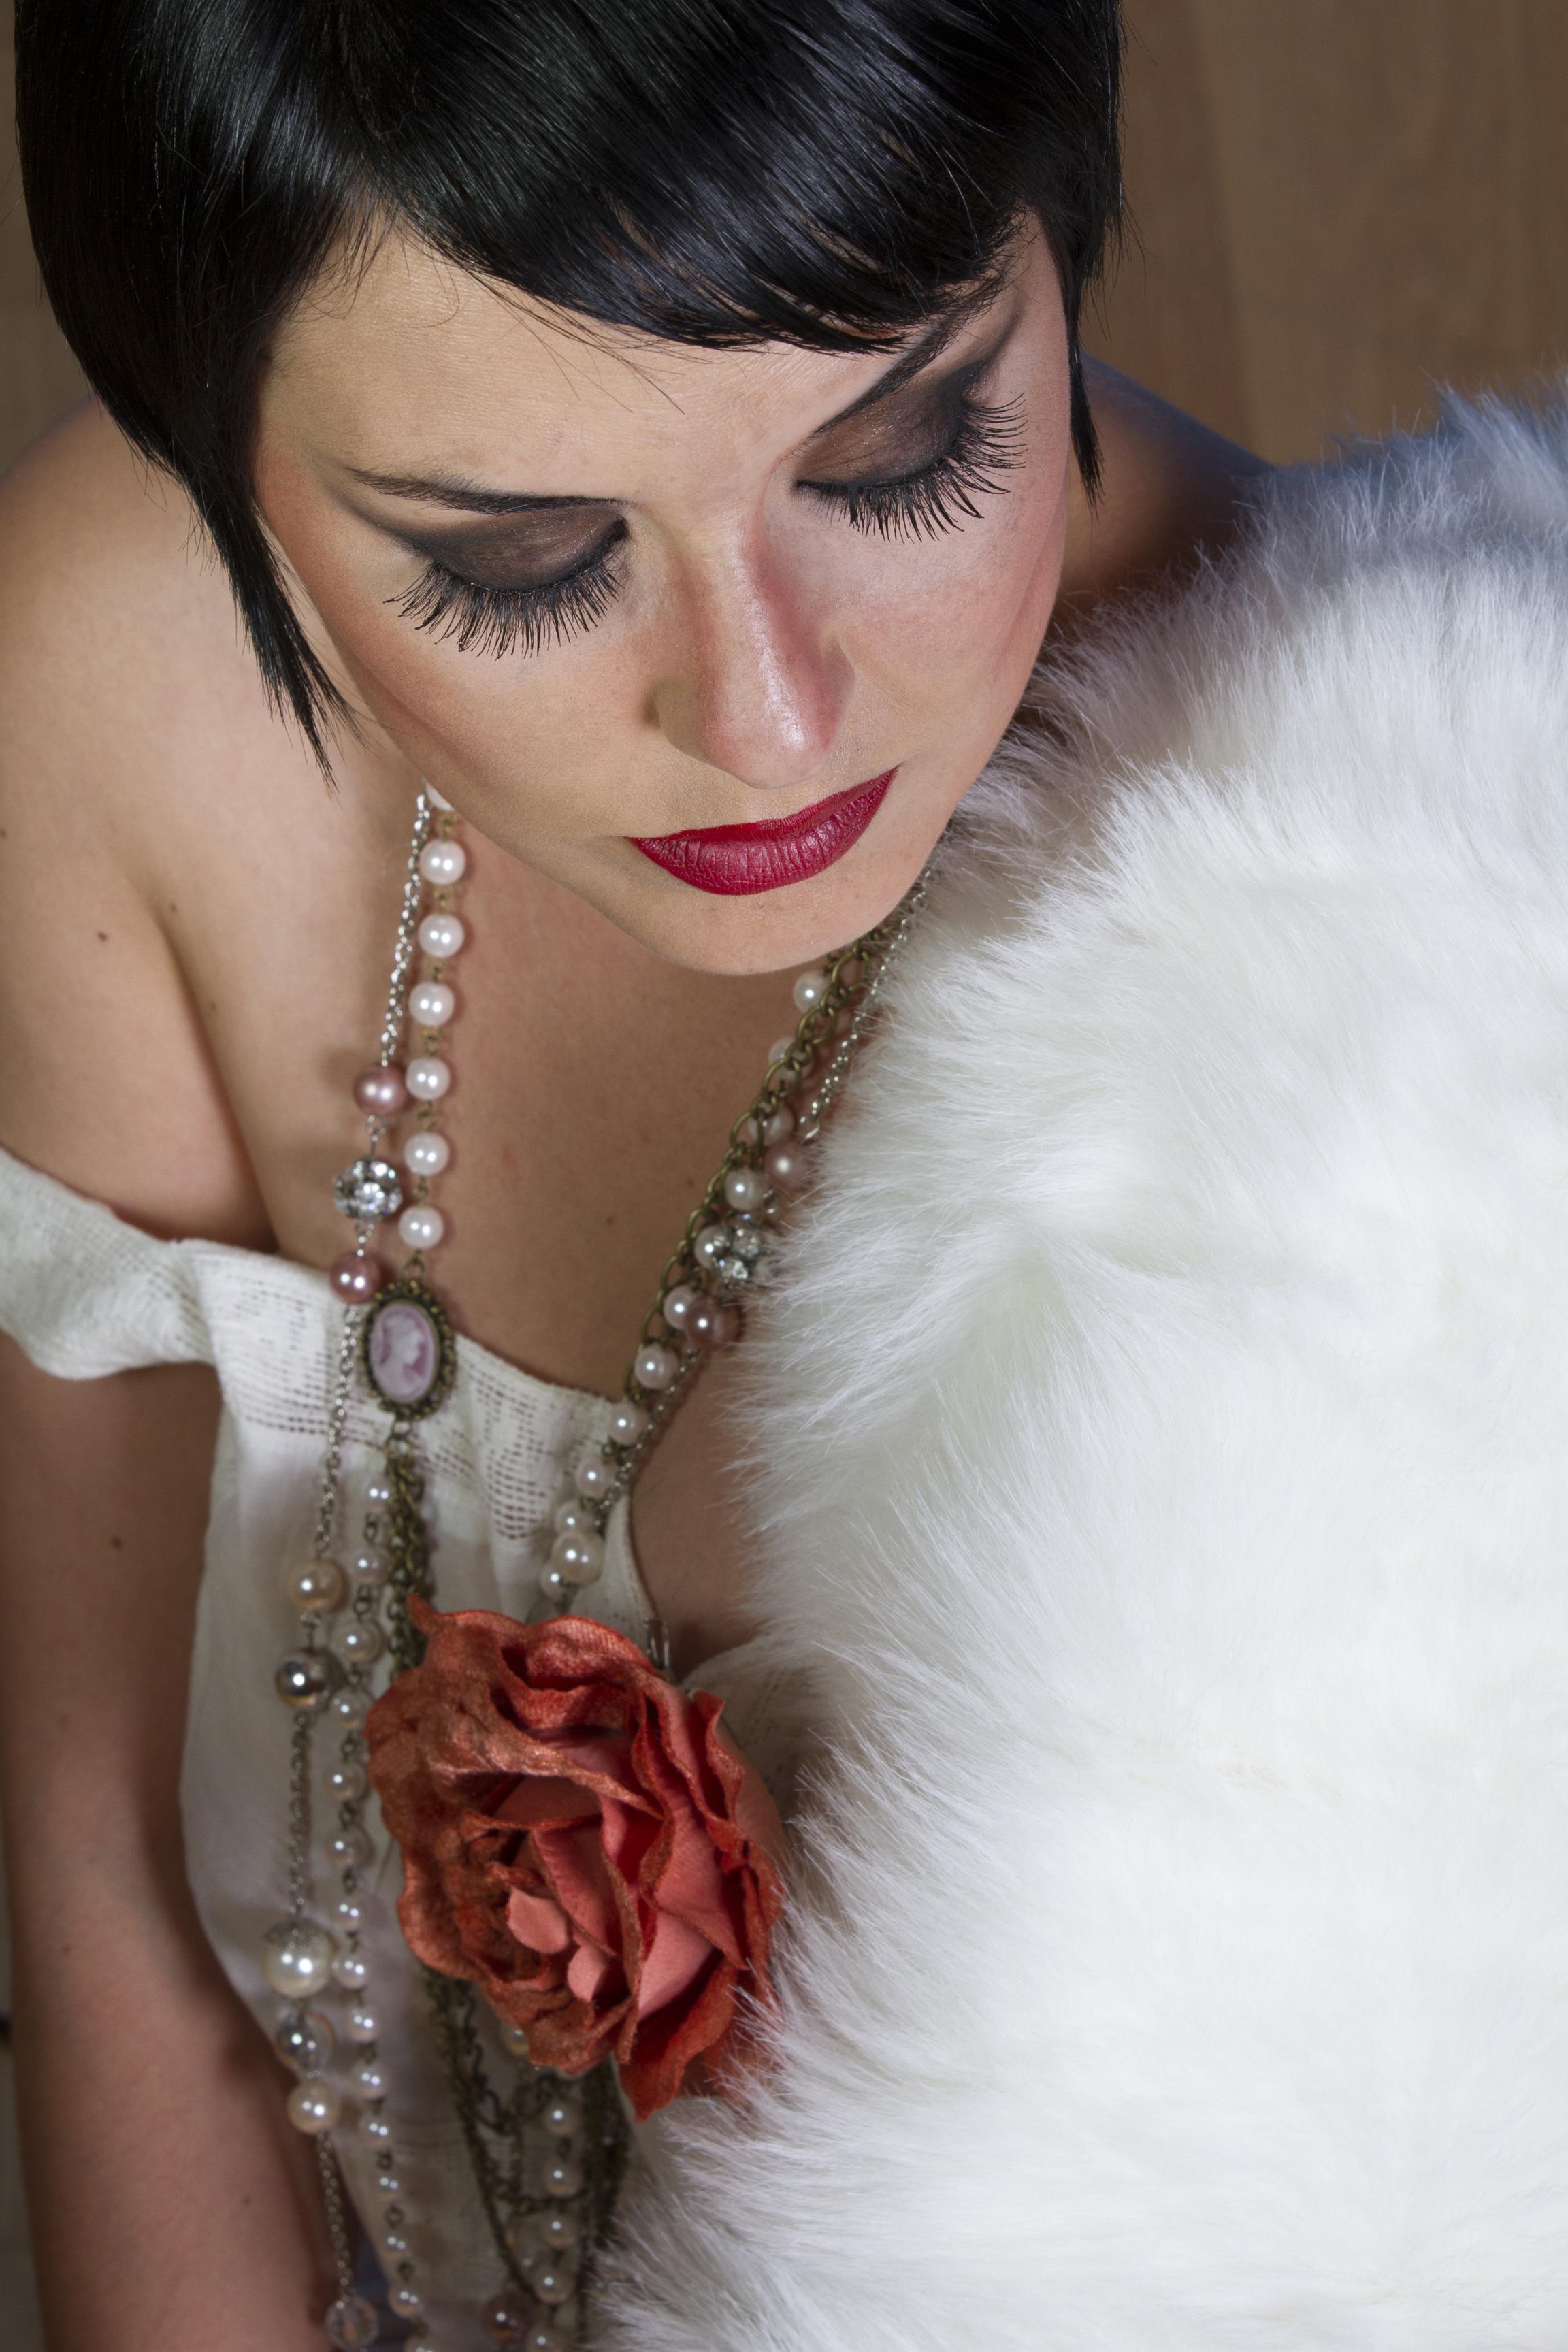 Great Gatsby - plan the perfect 1920s themed party - The Jazz